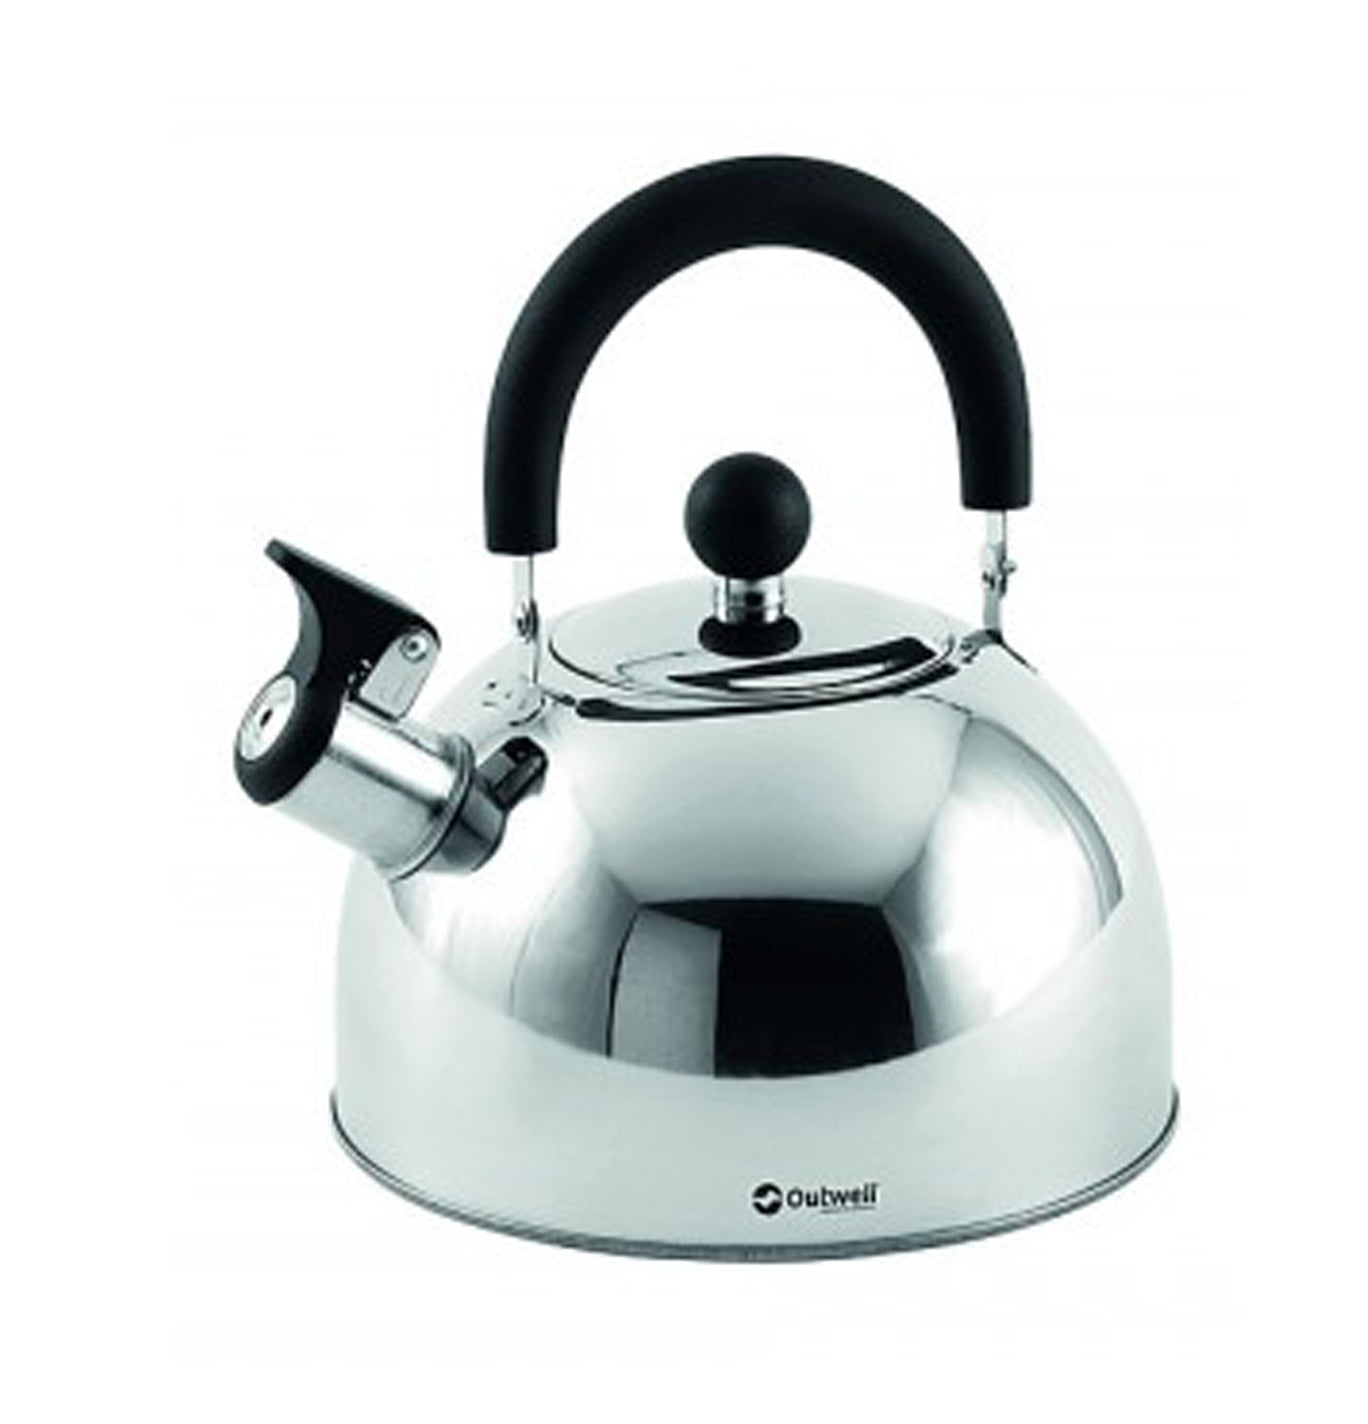 Outwell Silver Gas Kettle | 1.8L Image